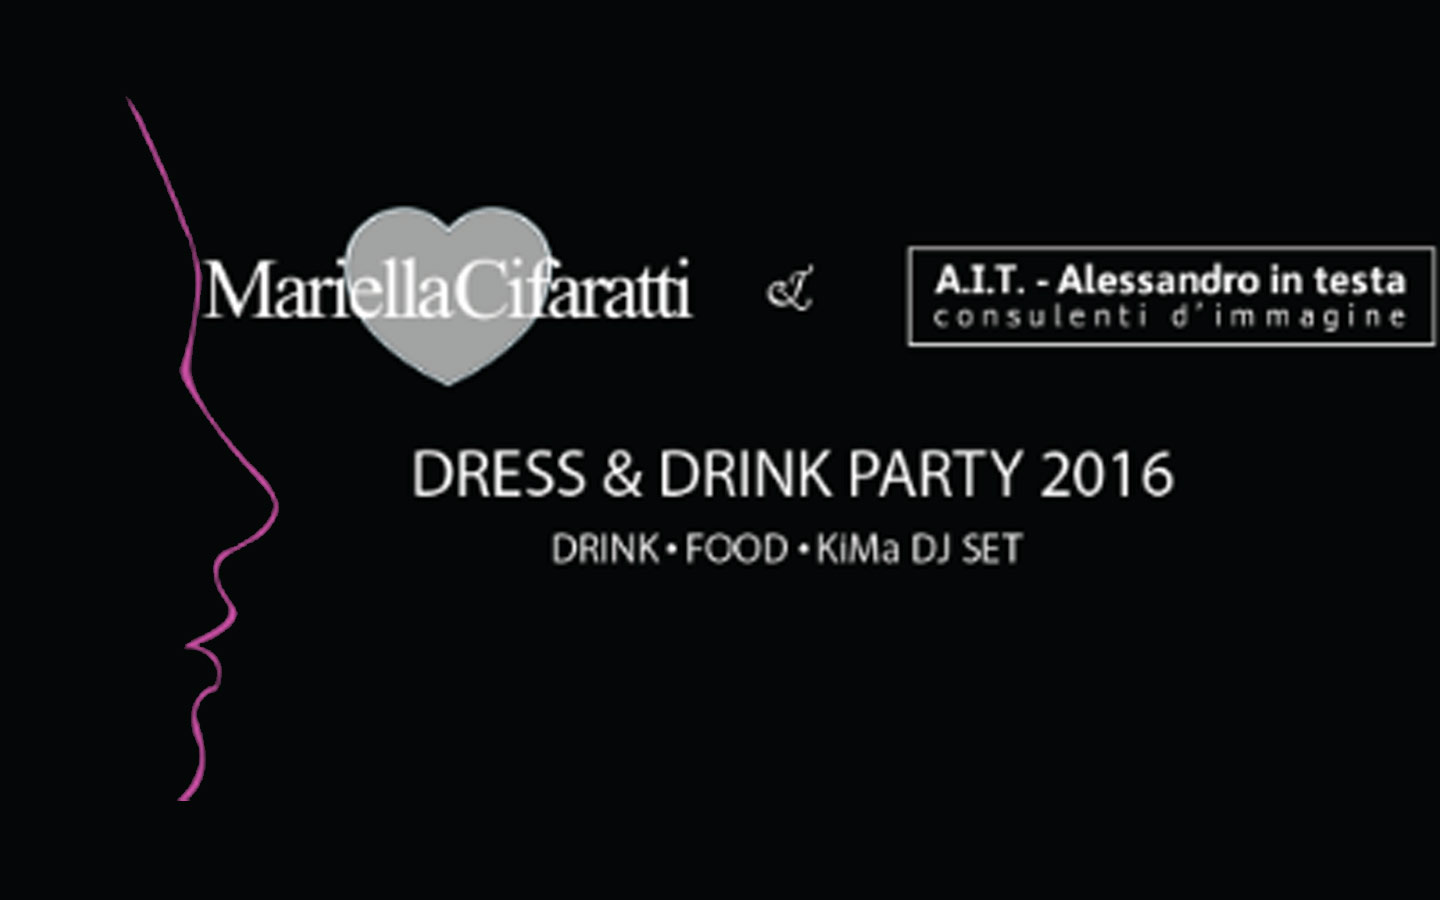 dress-drink-party